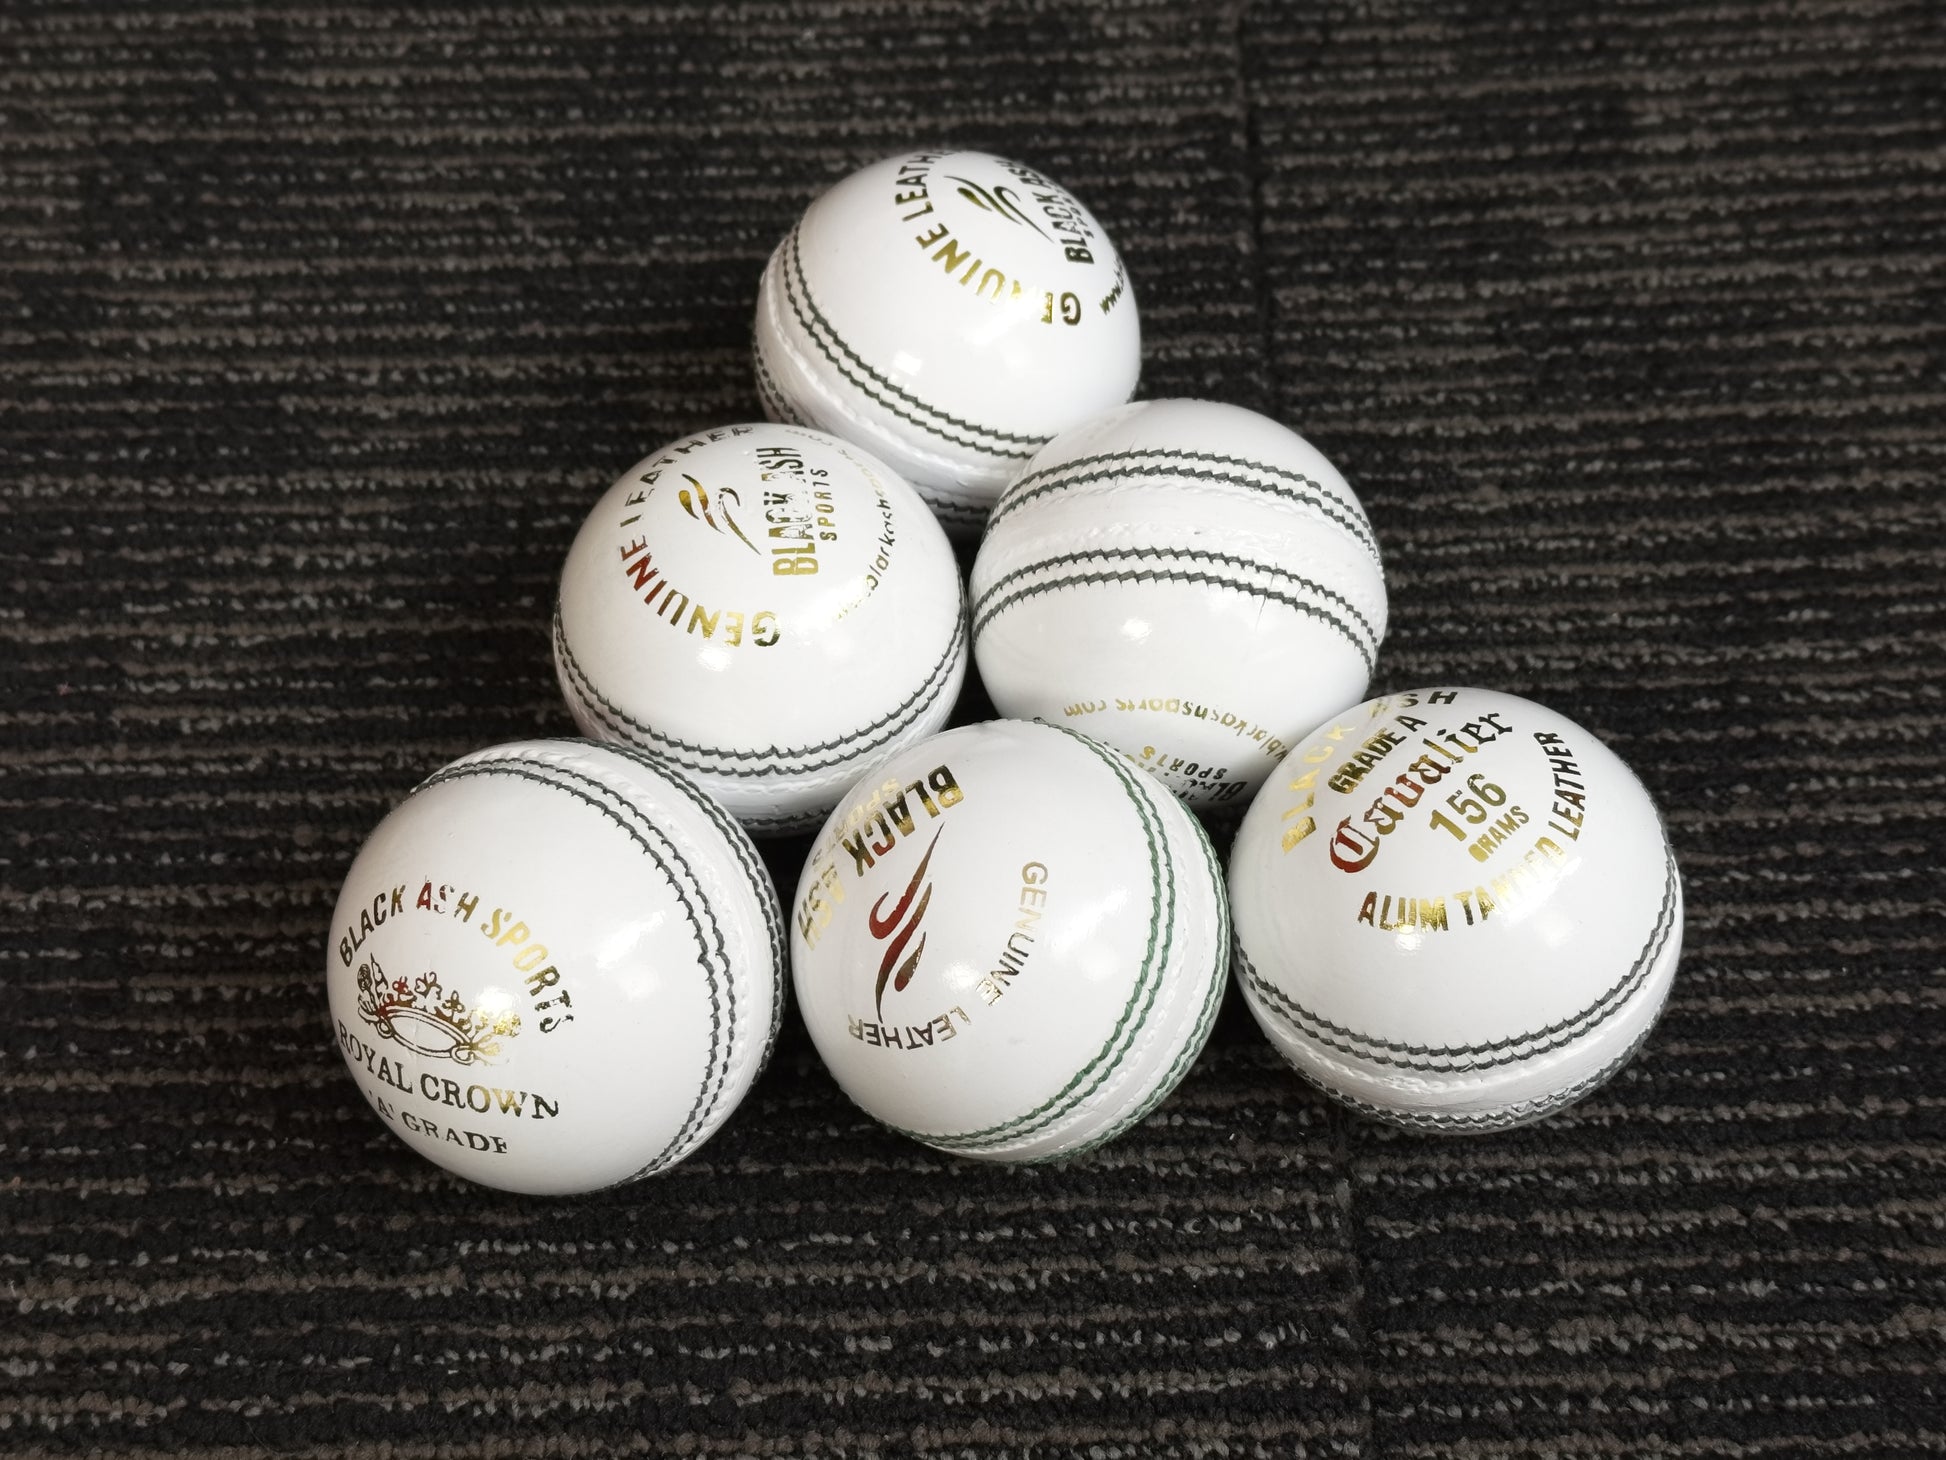 Black Ash Royal Crown pack of 6 white cricket leather balls, 156 grams, premium quality, suitable for 35 to 40 overs, with 4-piece construction, excellent shape retention, and MCC regulations compliant.